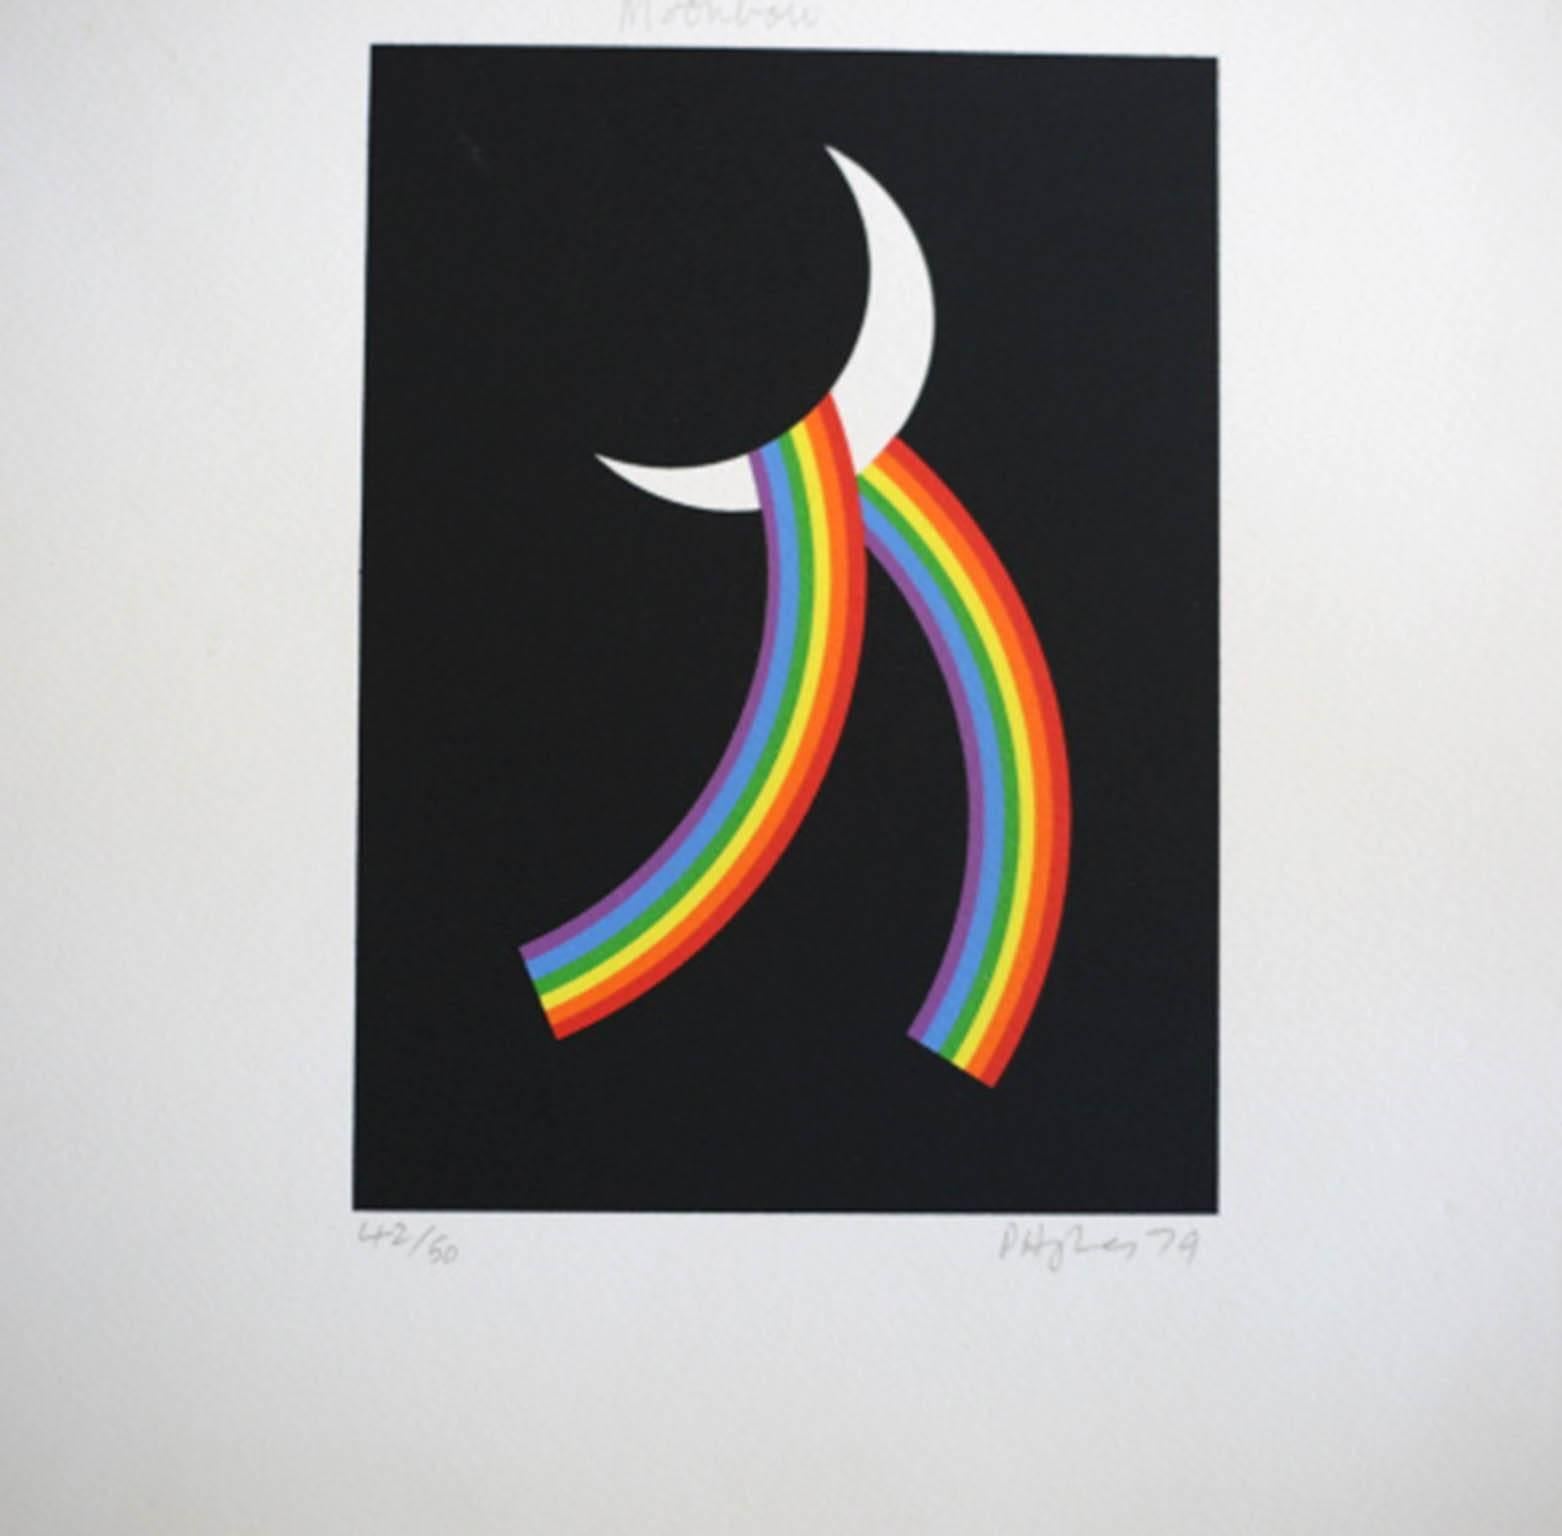 Artist: Patrick Hughes, British (1939)
Title: Moonbow
Year: 1979
Medium: Silkscreen, signed and numbered in pencil #42/50
Image: 7 H x 5